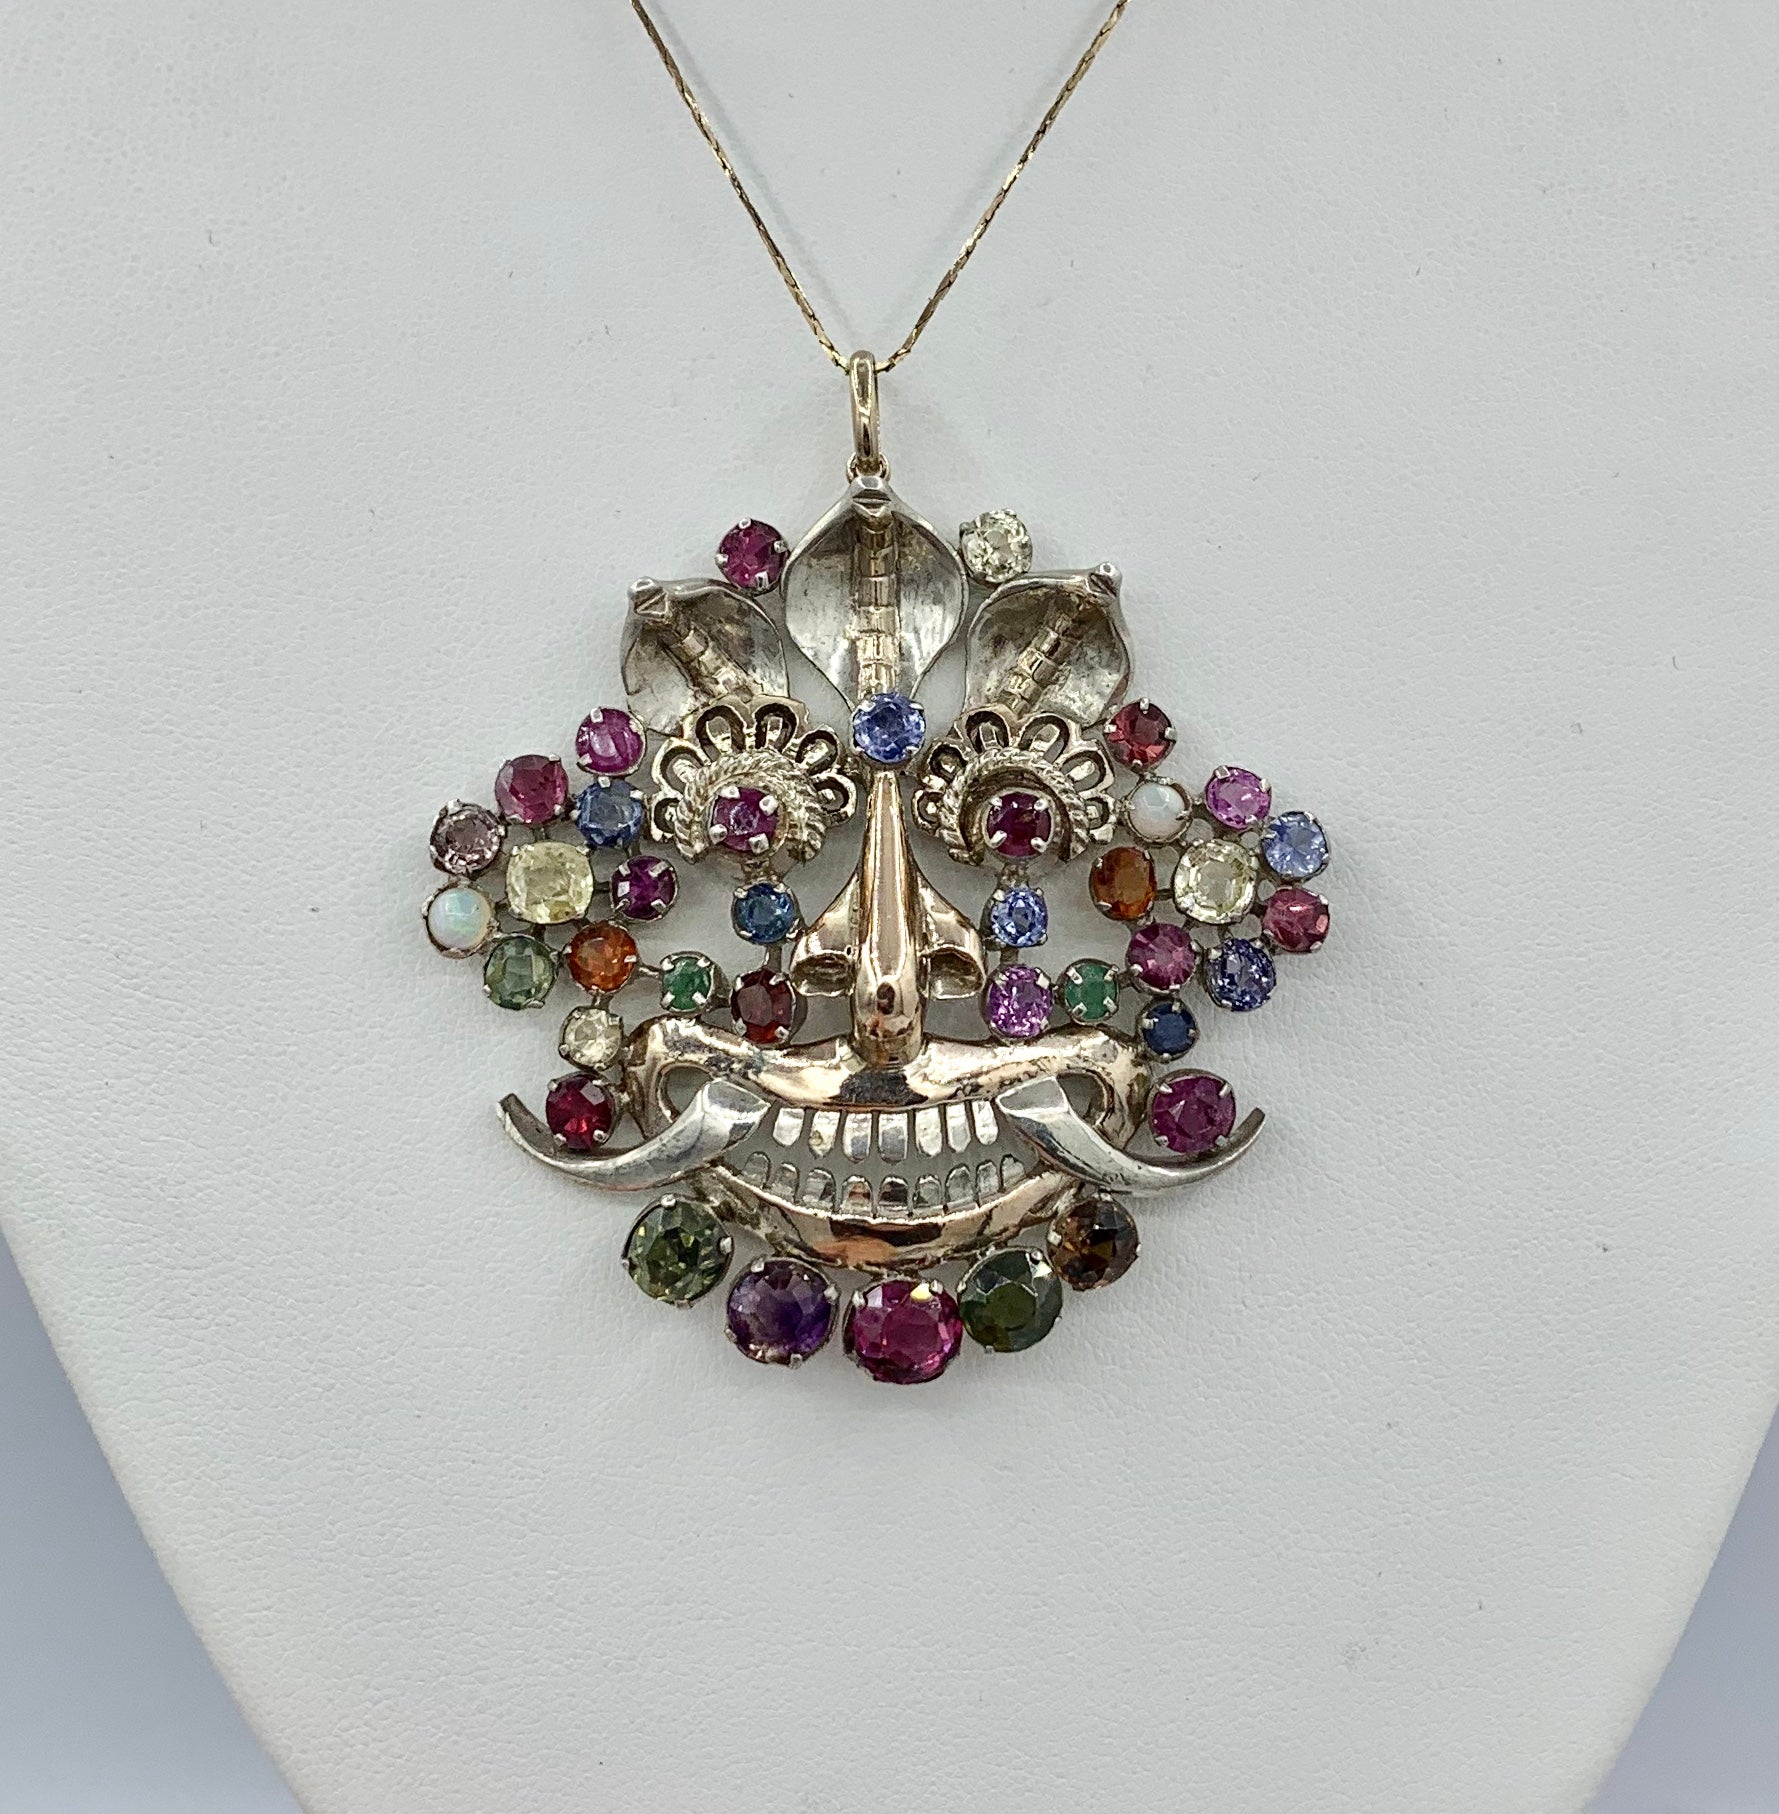 This is an absolutely magnificent Natural Multicolor Sapphire and Opal Mask Pendant in Silver and 14 Karat Gold.  The extraordinary jewel is set throughout with Natural Mined Multicolor Sapphires of great beauty.  The four large sapphires at the